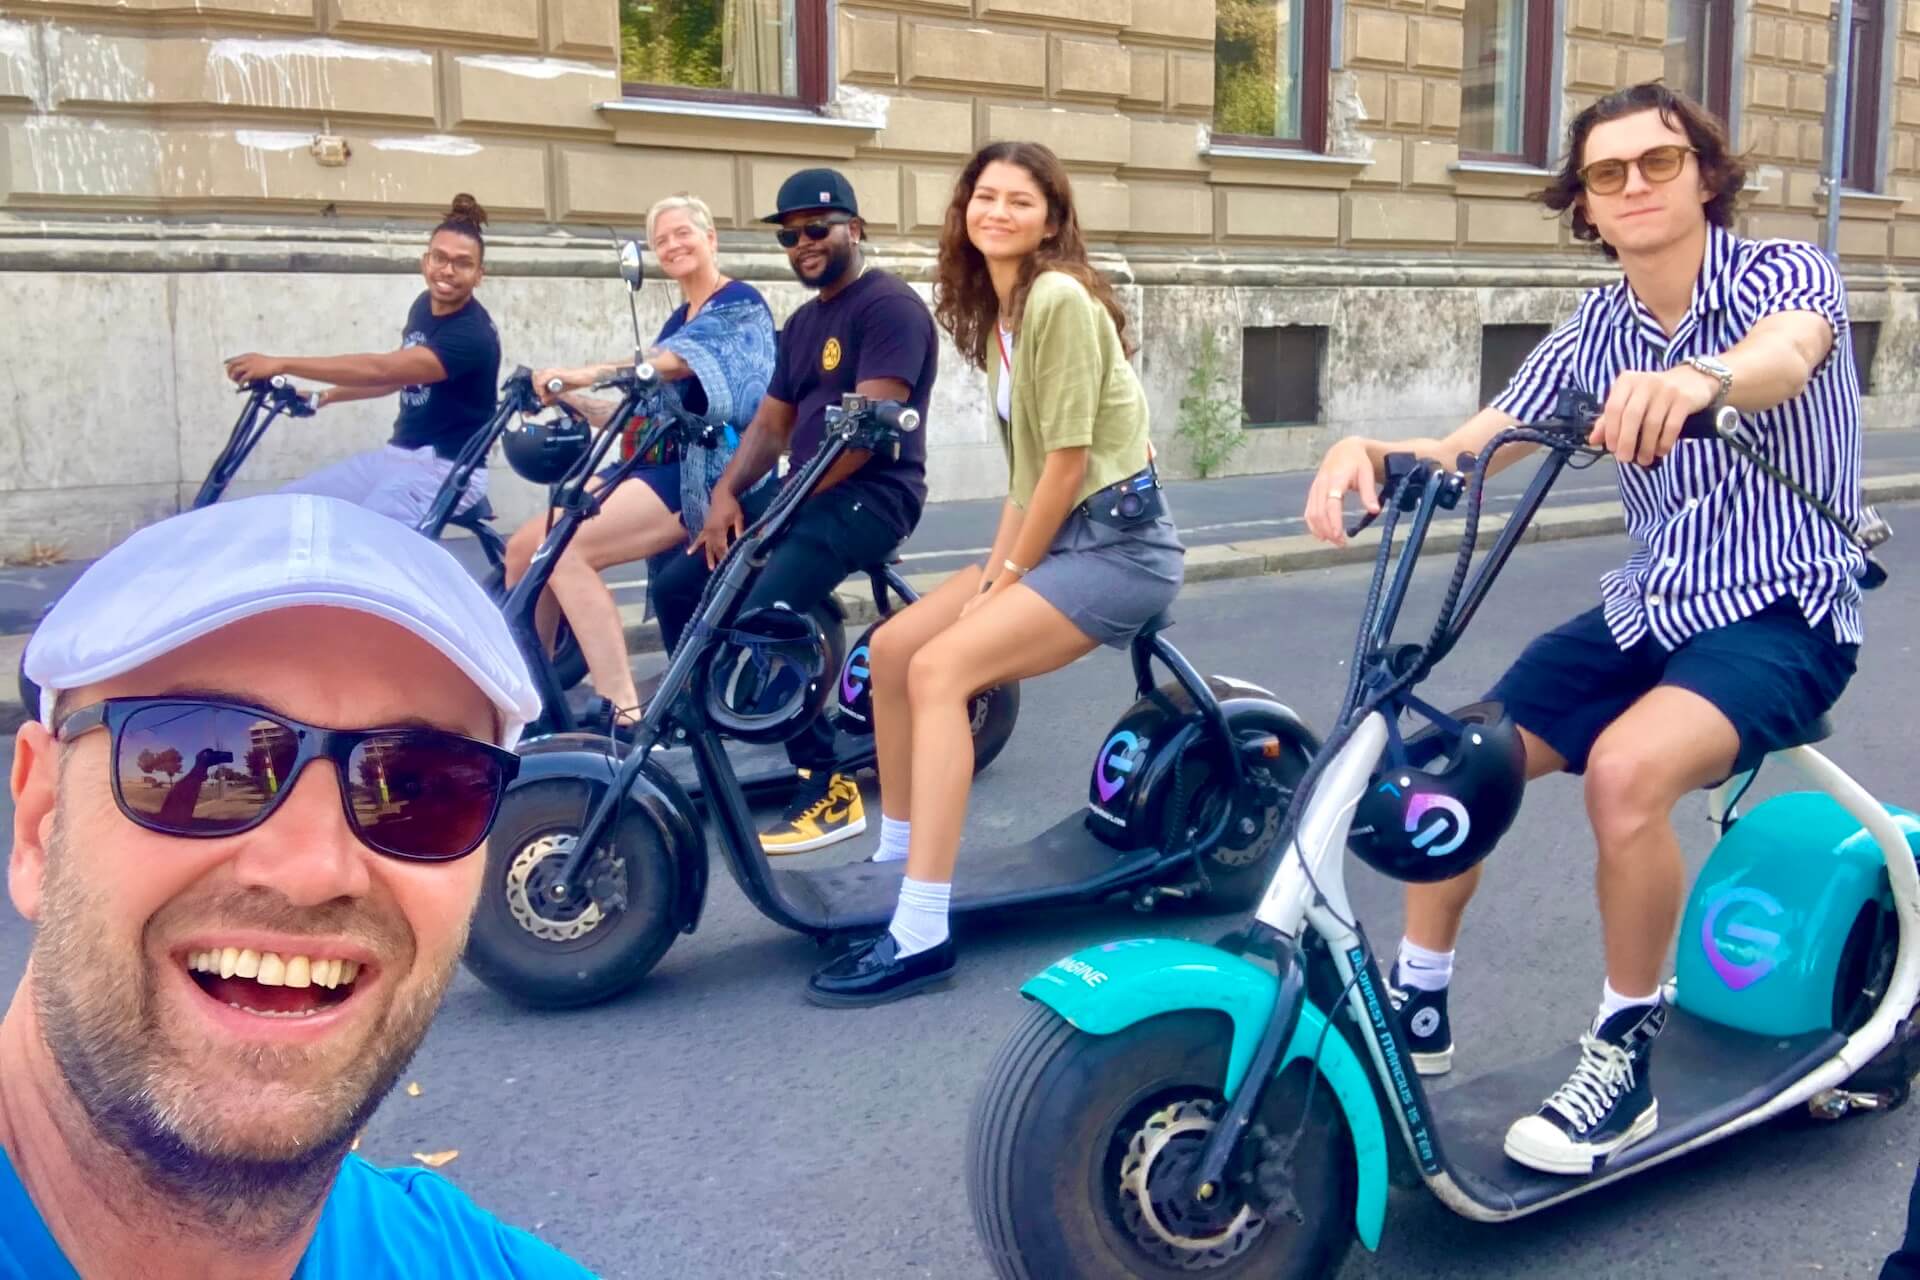 Zendaya and Tom Holland on an All In Budapest e-scooter tour in 2022 with E-Magine Tours Budapest